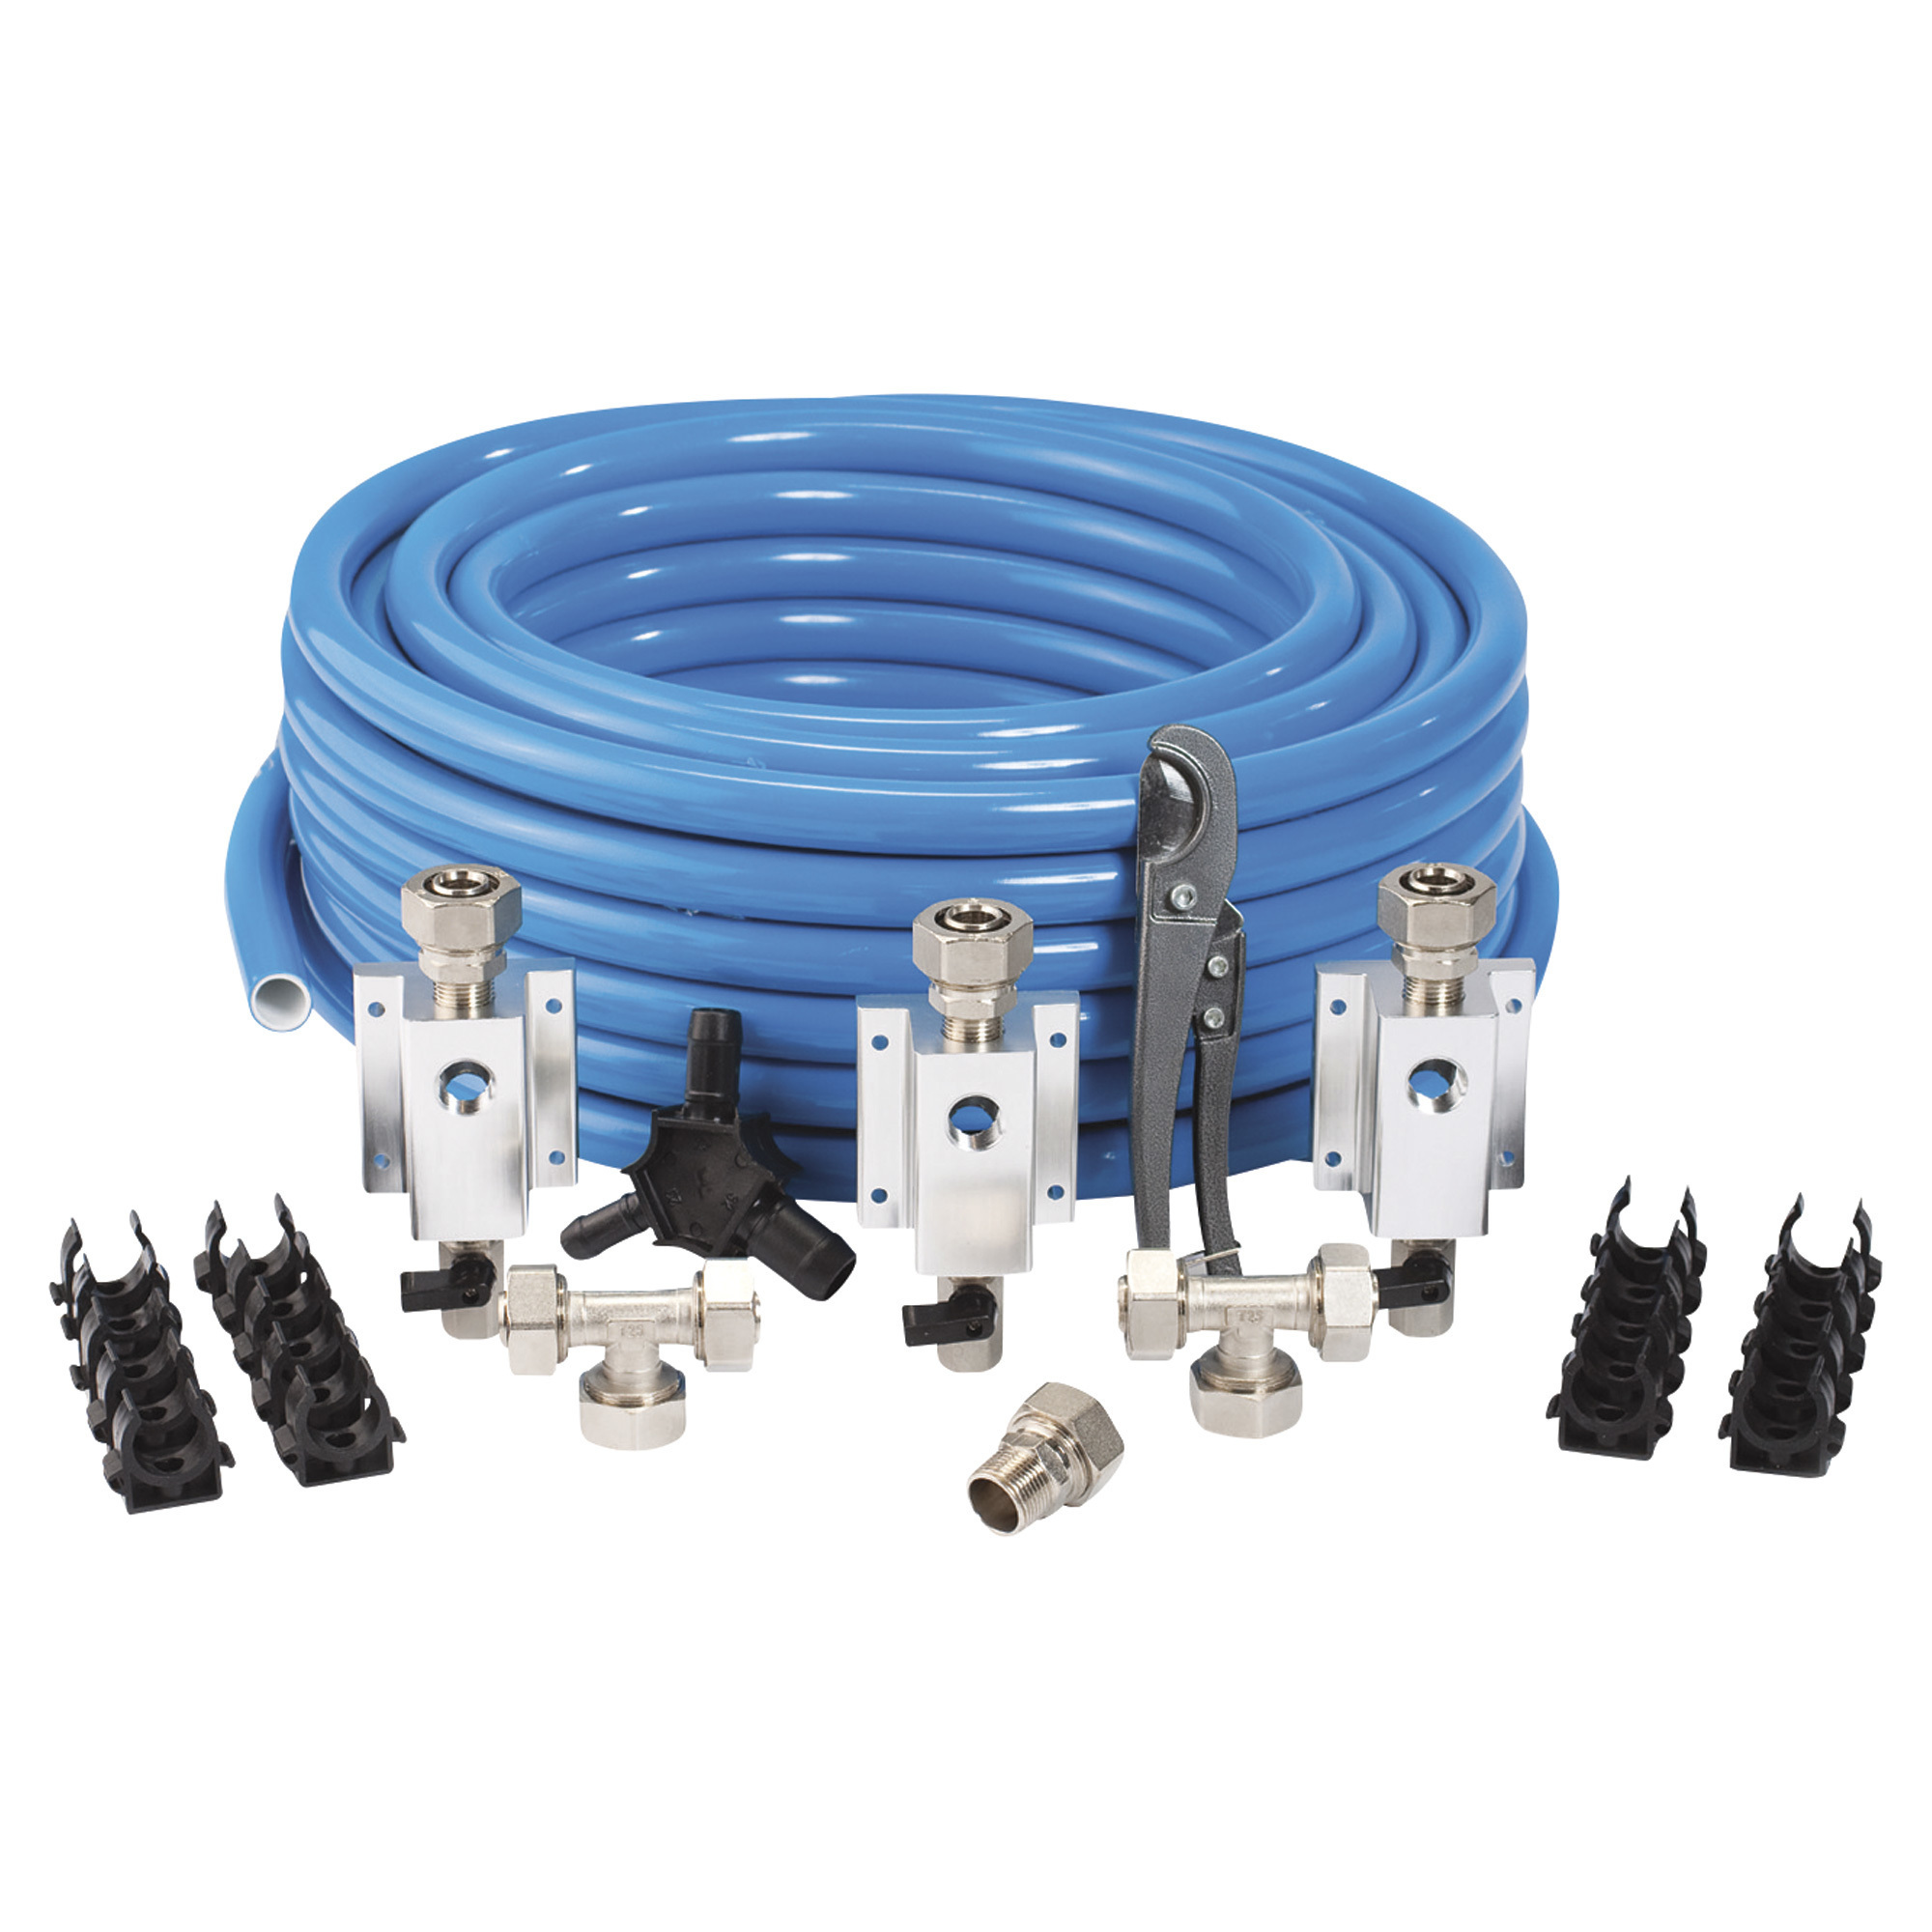 RapidAir MaxLine 3/4Inch 100ft. Master Kit Compressed Air Piping System, Model M7500